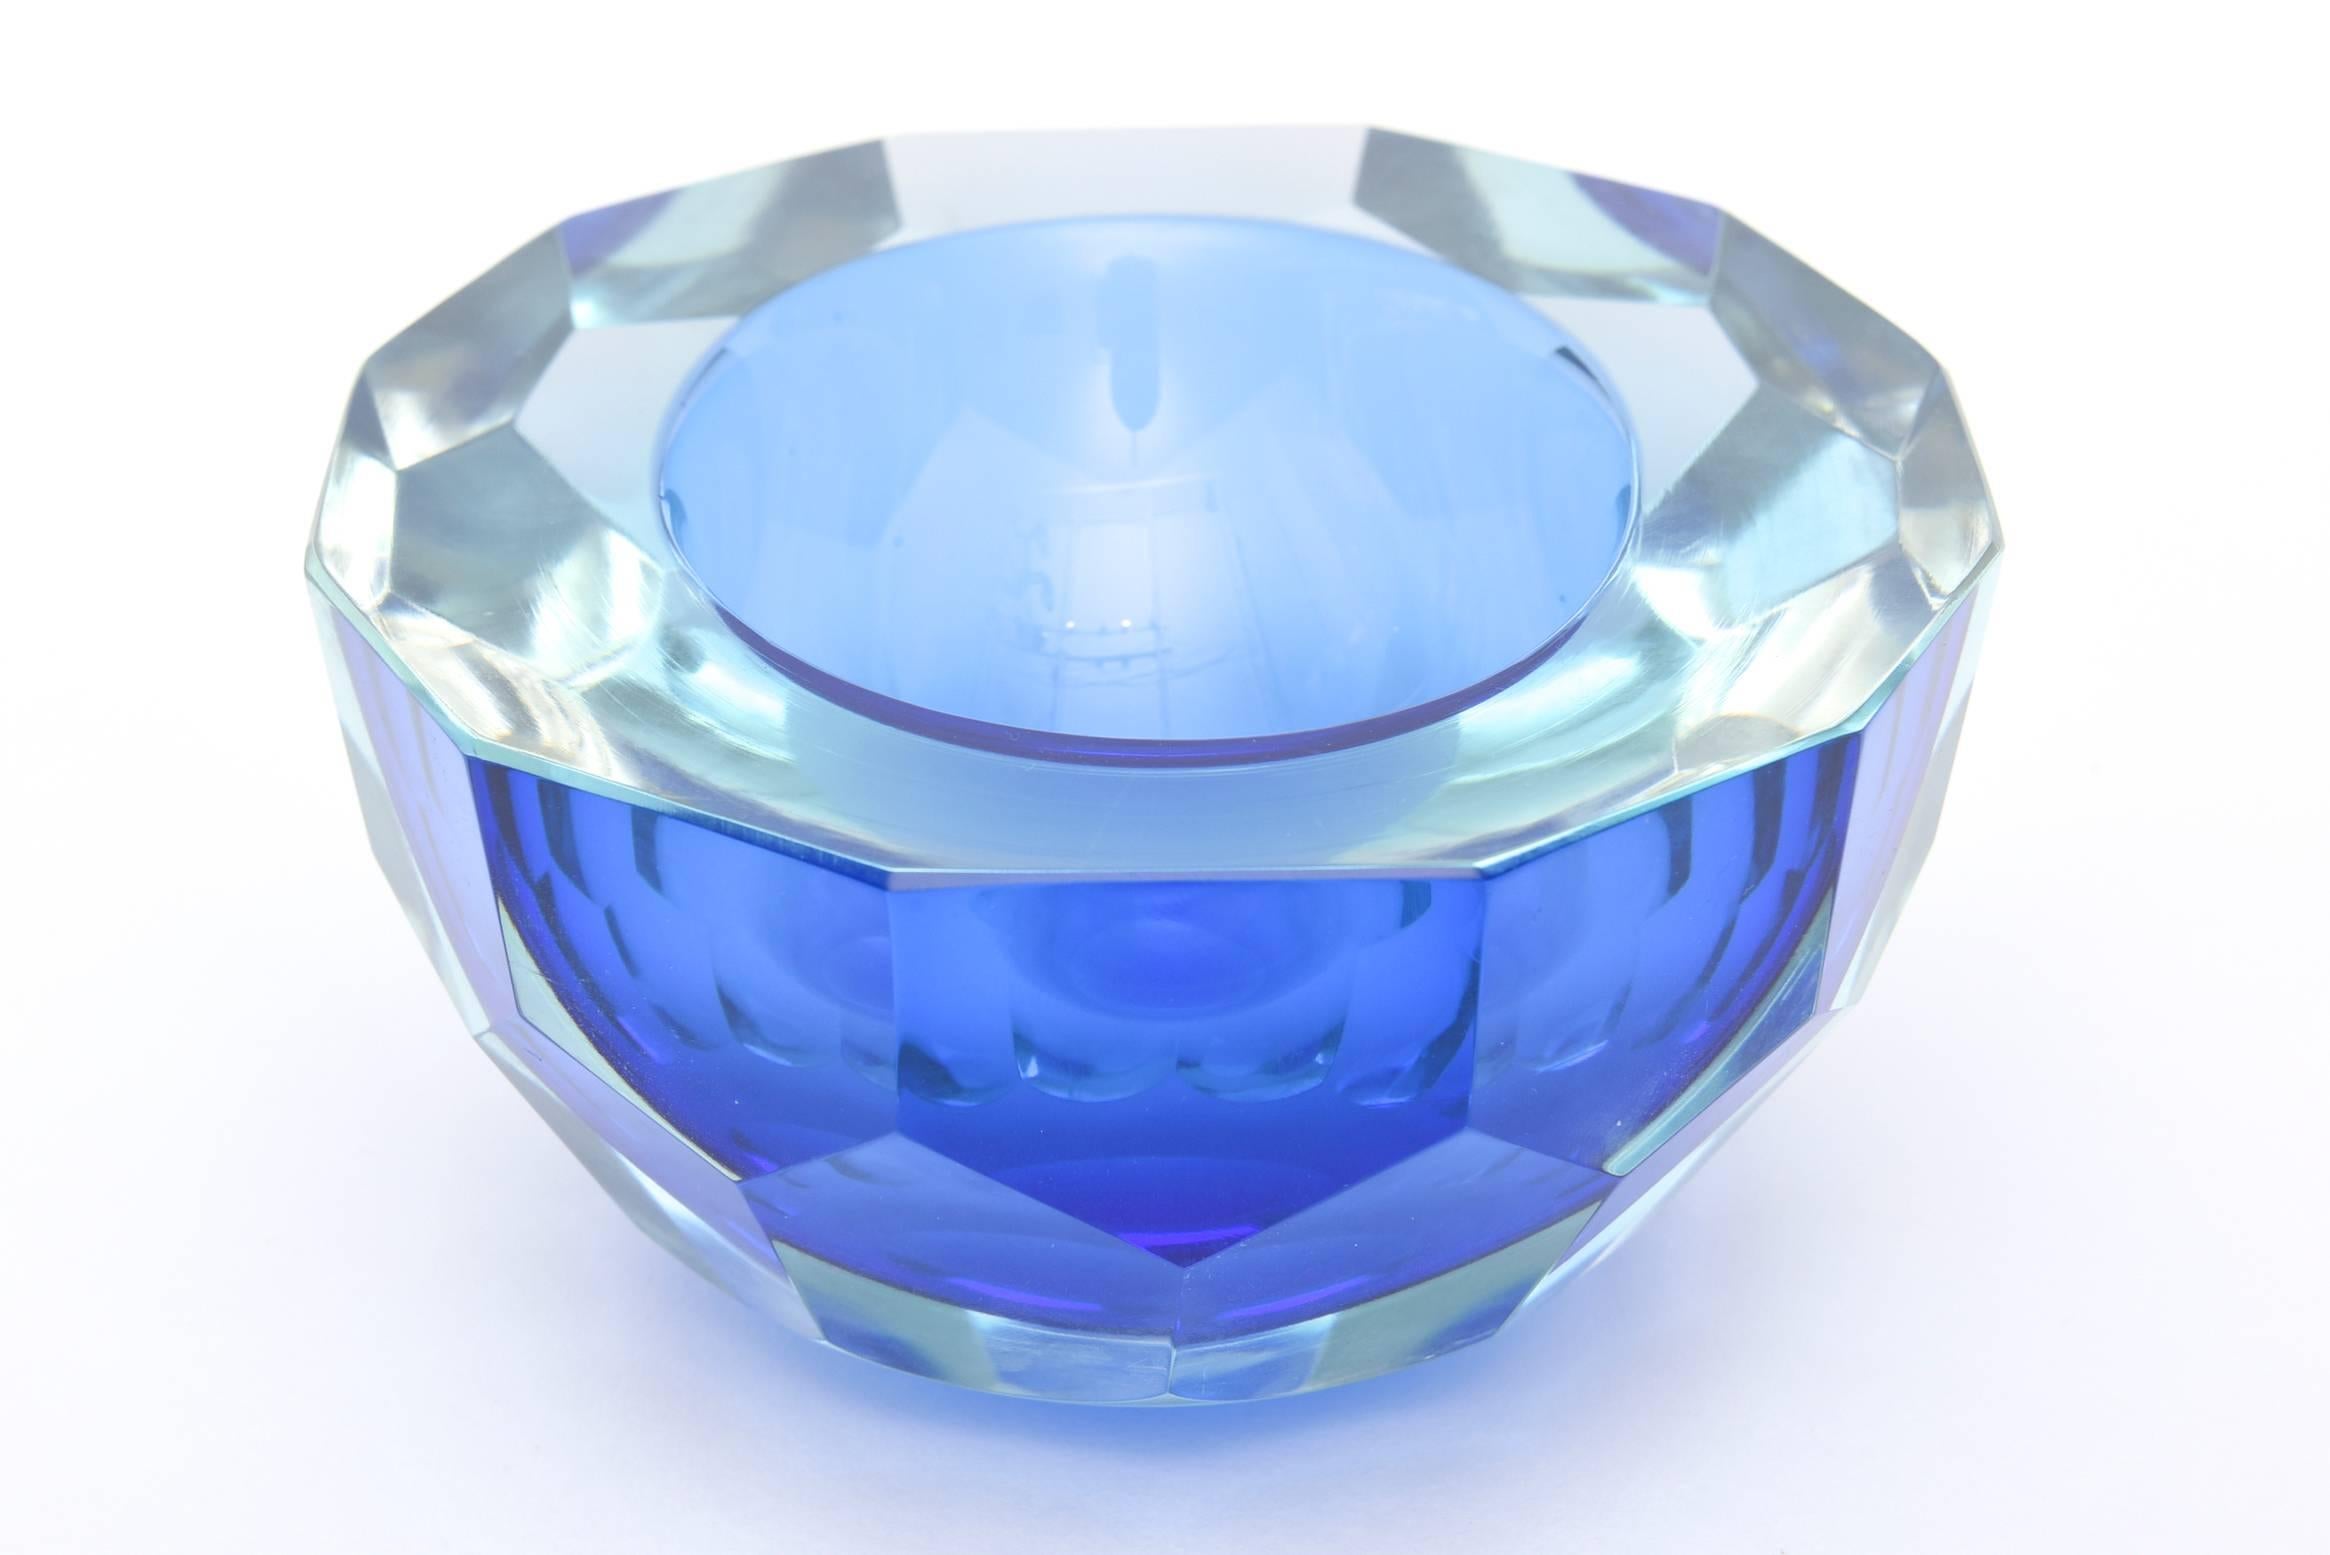 Late 20th Century Italian Murano Sommerso Diamond Faceted Flat Cut Polished Glass Geode Bowl